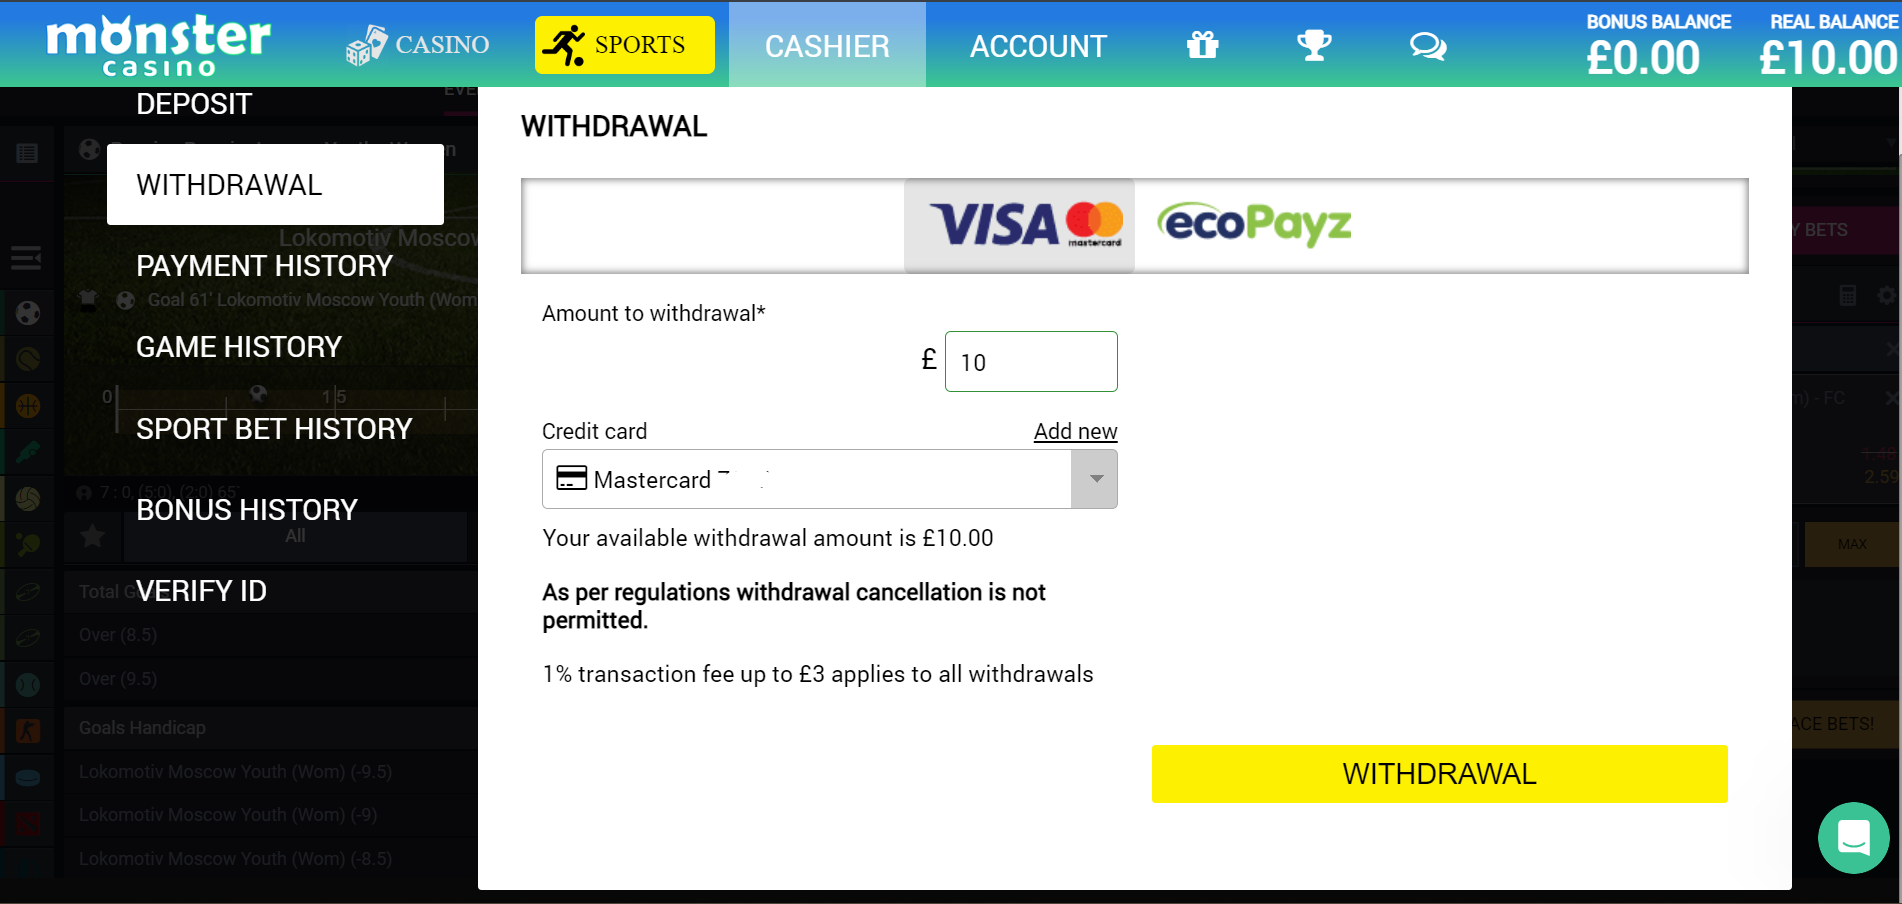 View withdrawal options